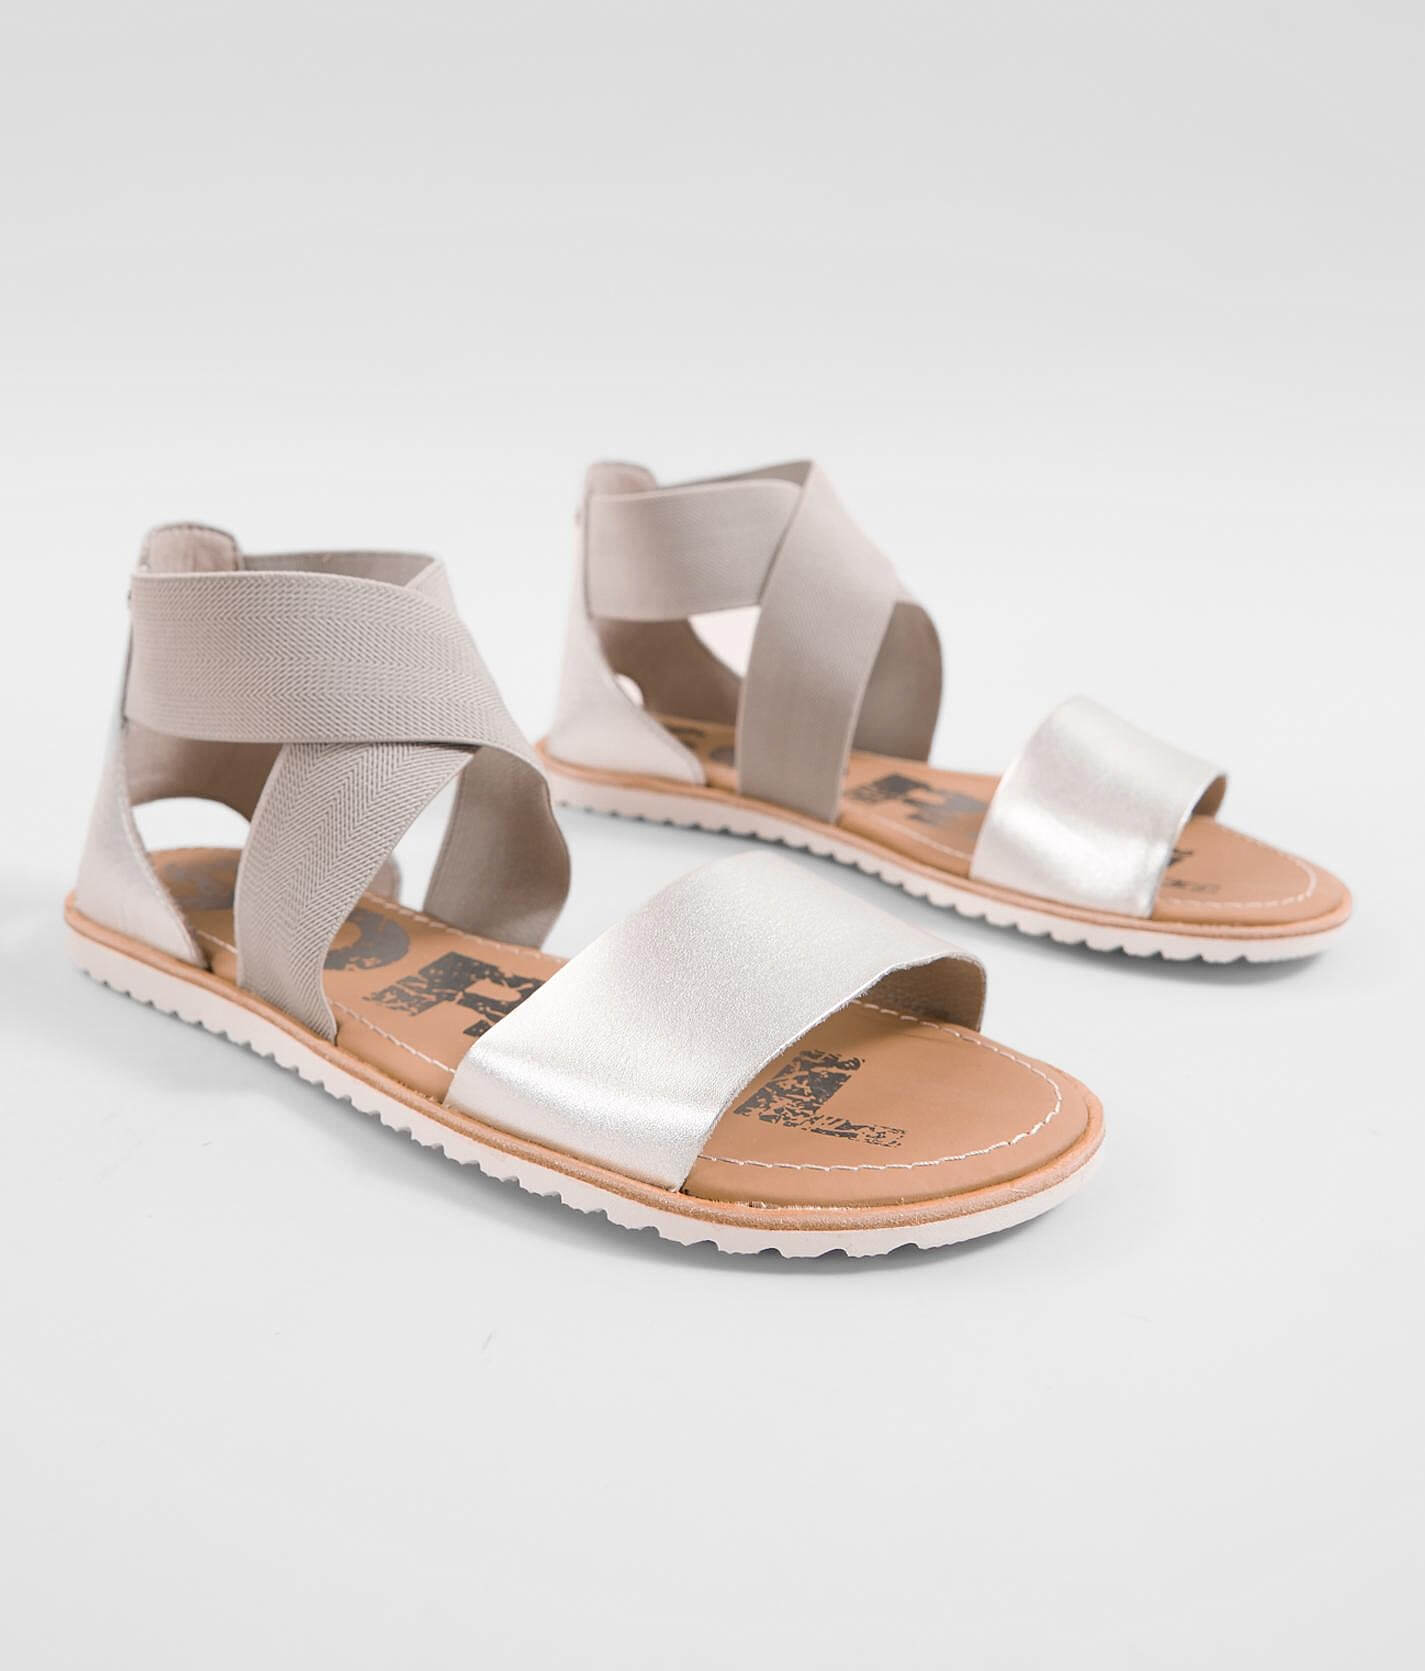 silver buckle sandals